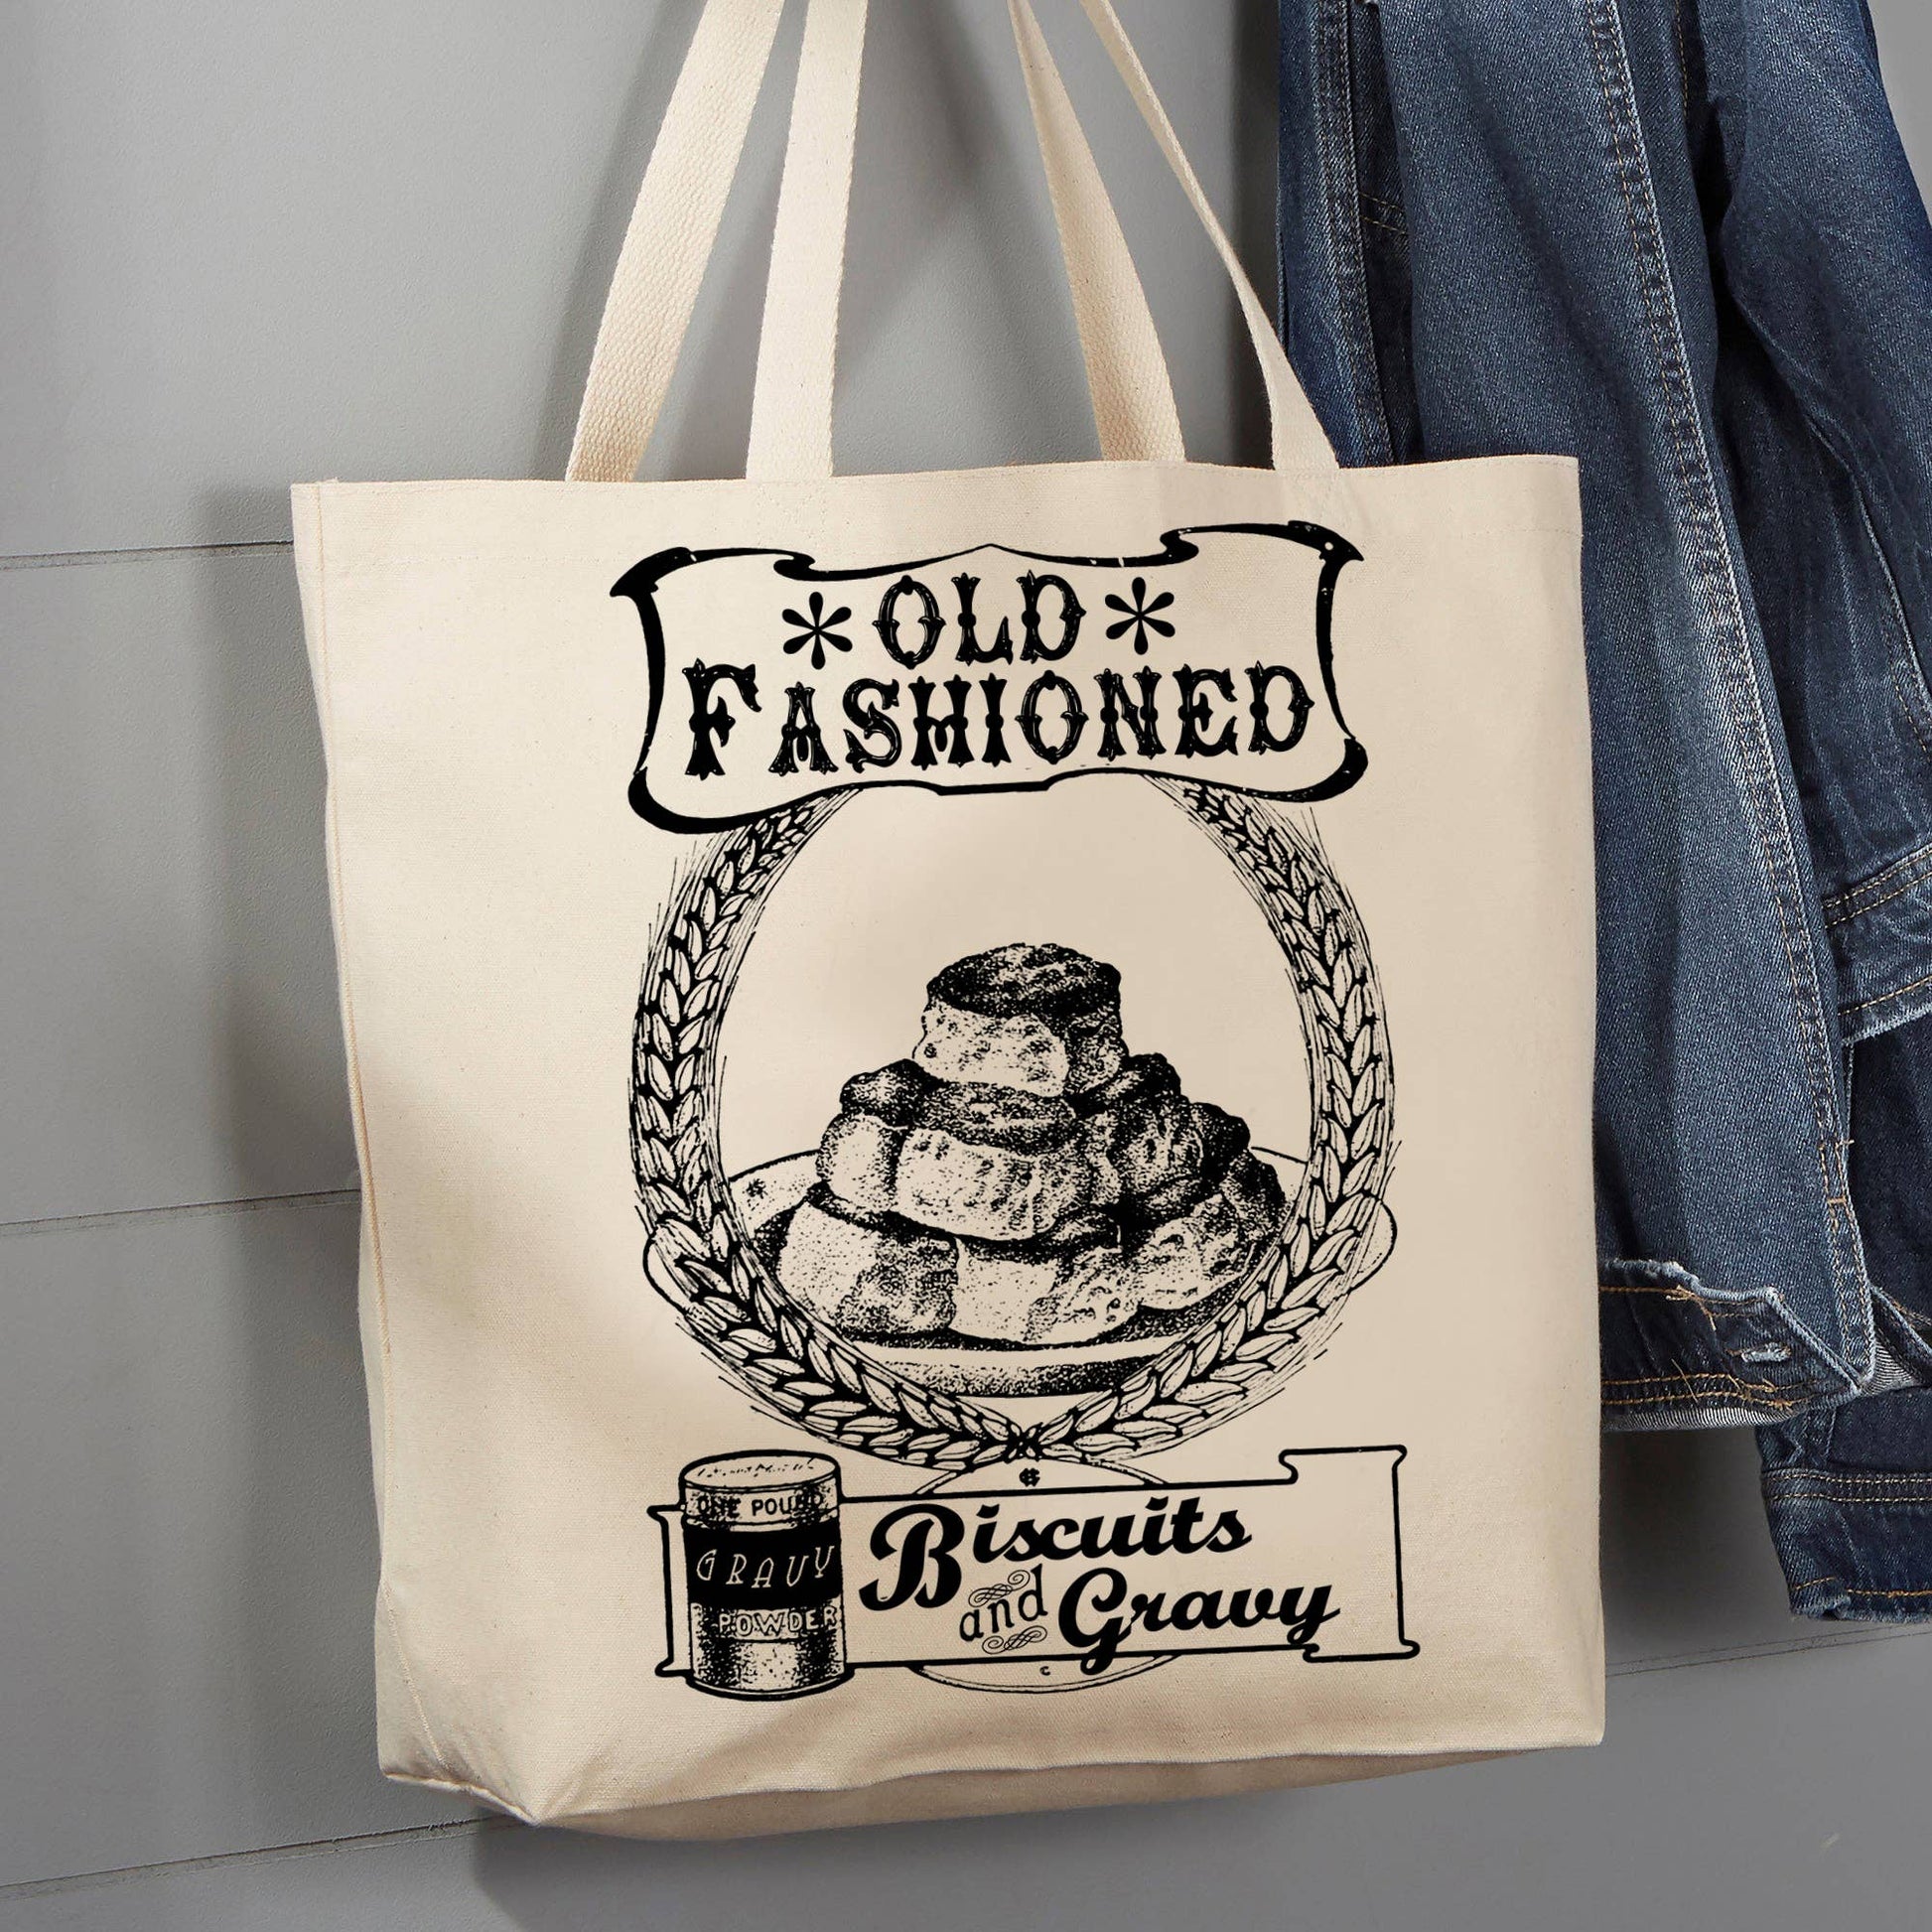 Country Farm, Old Fashioned Biscuits,  12 oz  Tote Bag